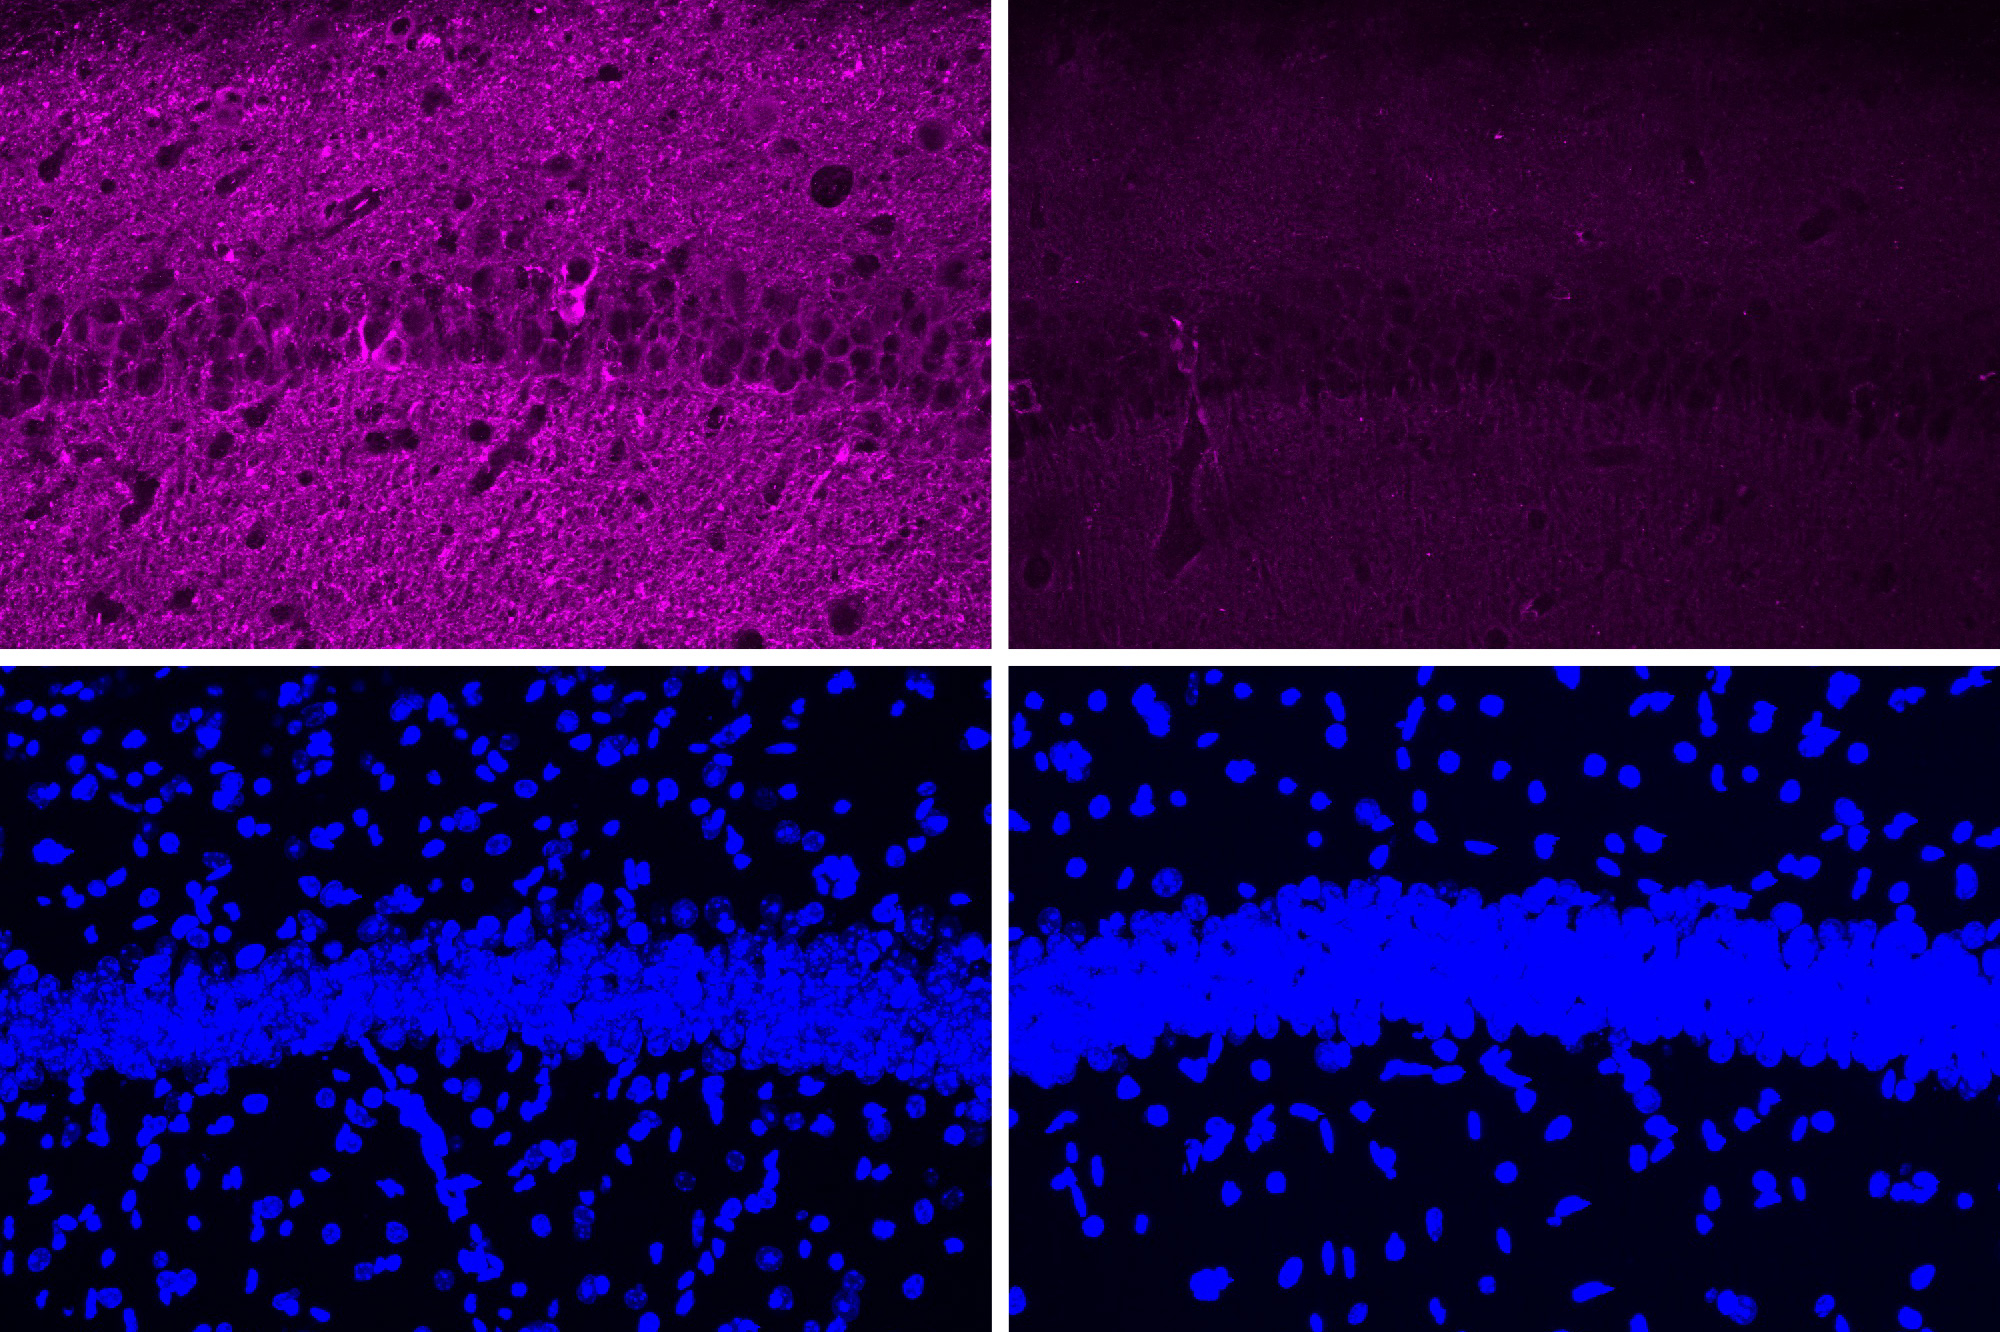 Four panels in a 2x2 array. The top left shows a lot of purple staining of cells. The top right shows much less purple. The bottom row shows two nearly idential stripes of blue with lots of blue spots above and below.